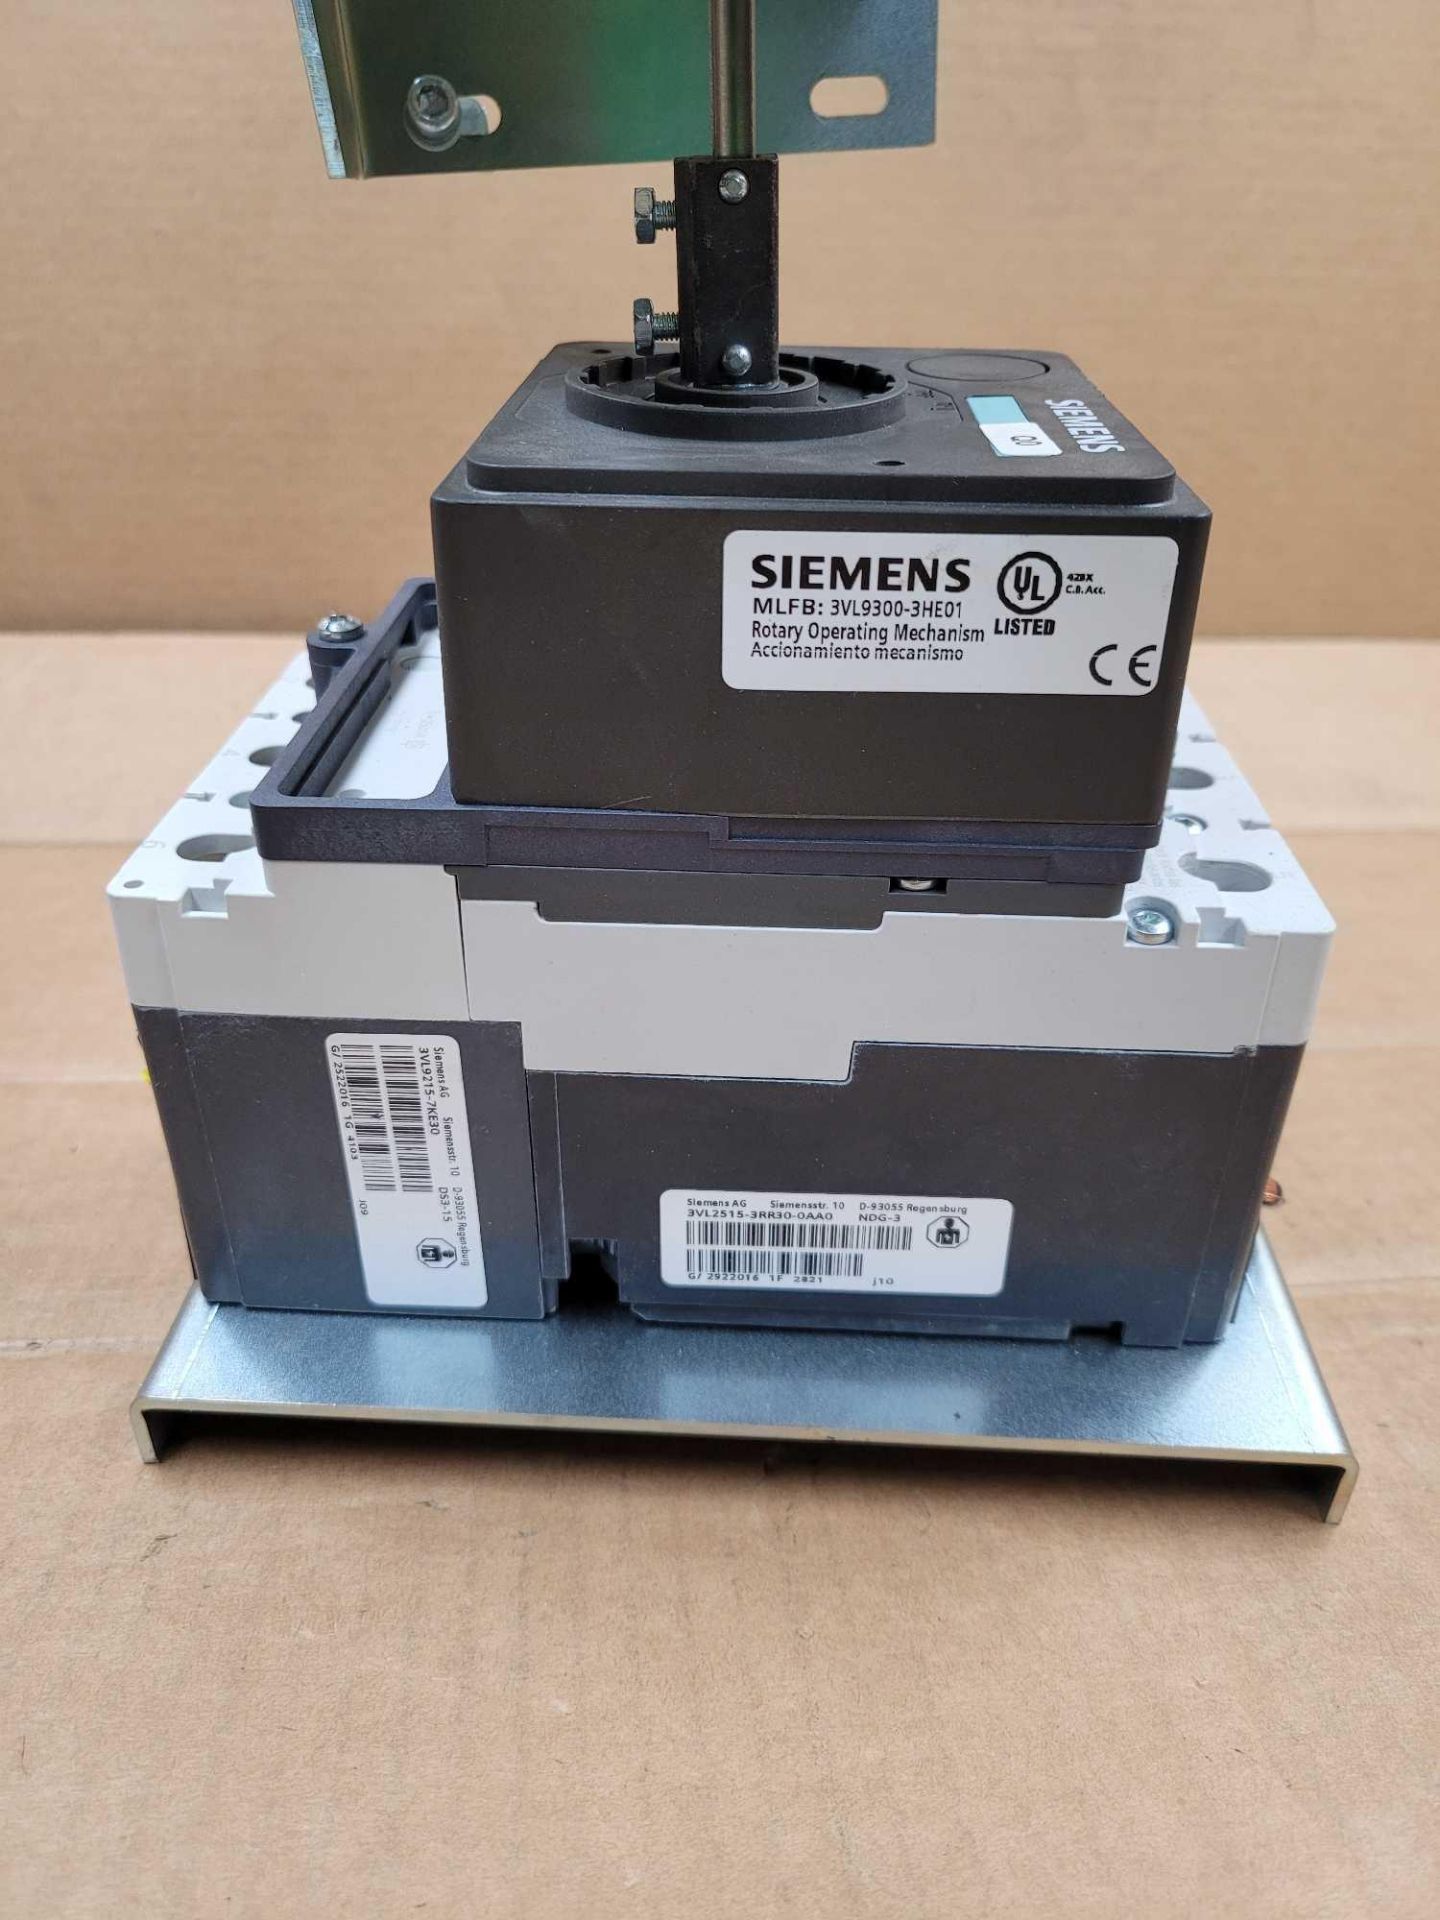 SIEMENS HDR3S150L with 3VL9300-3HE01 and SCA 90002.919005 / 150 Amp Circuit Breaker with Rotary Oper - Image 4 of 9